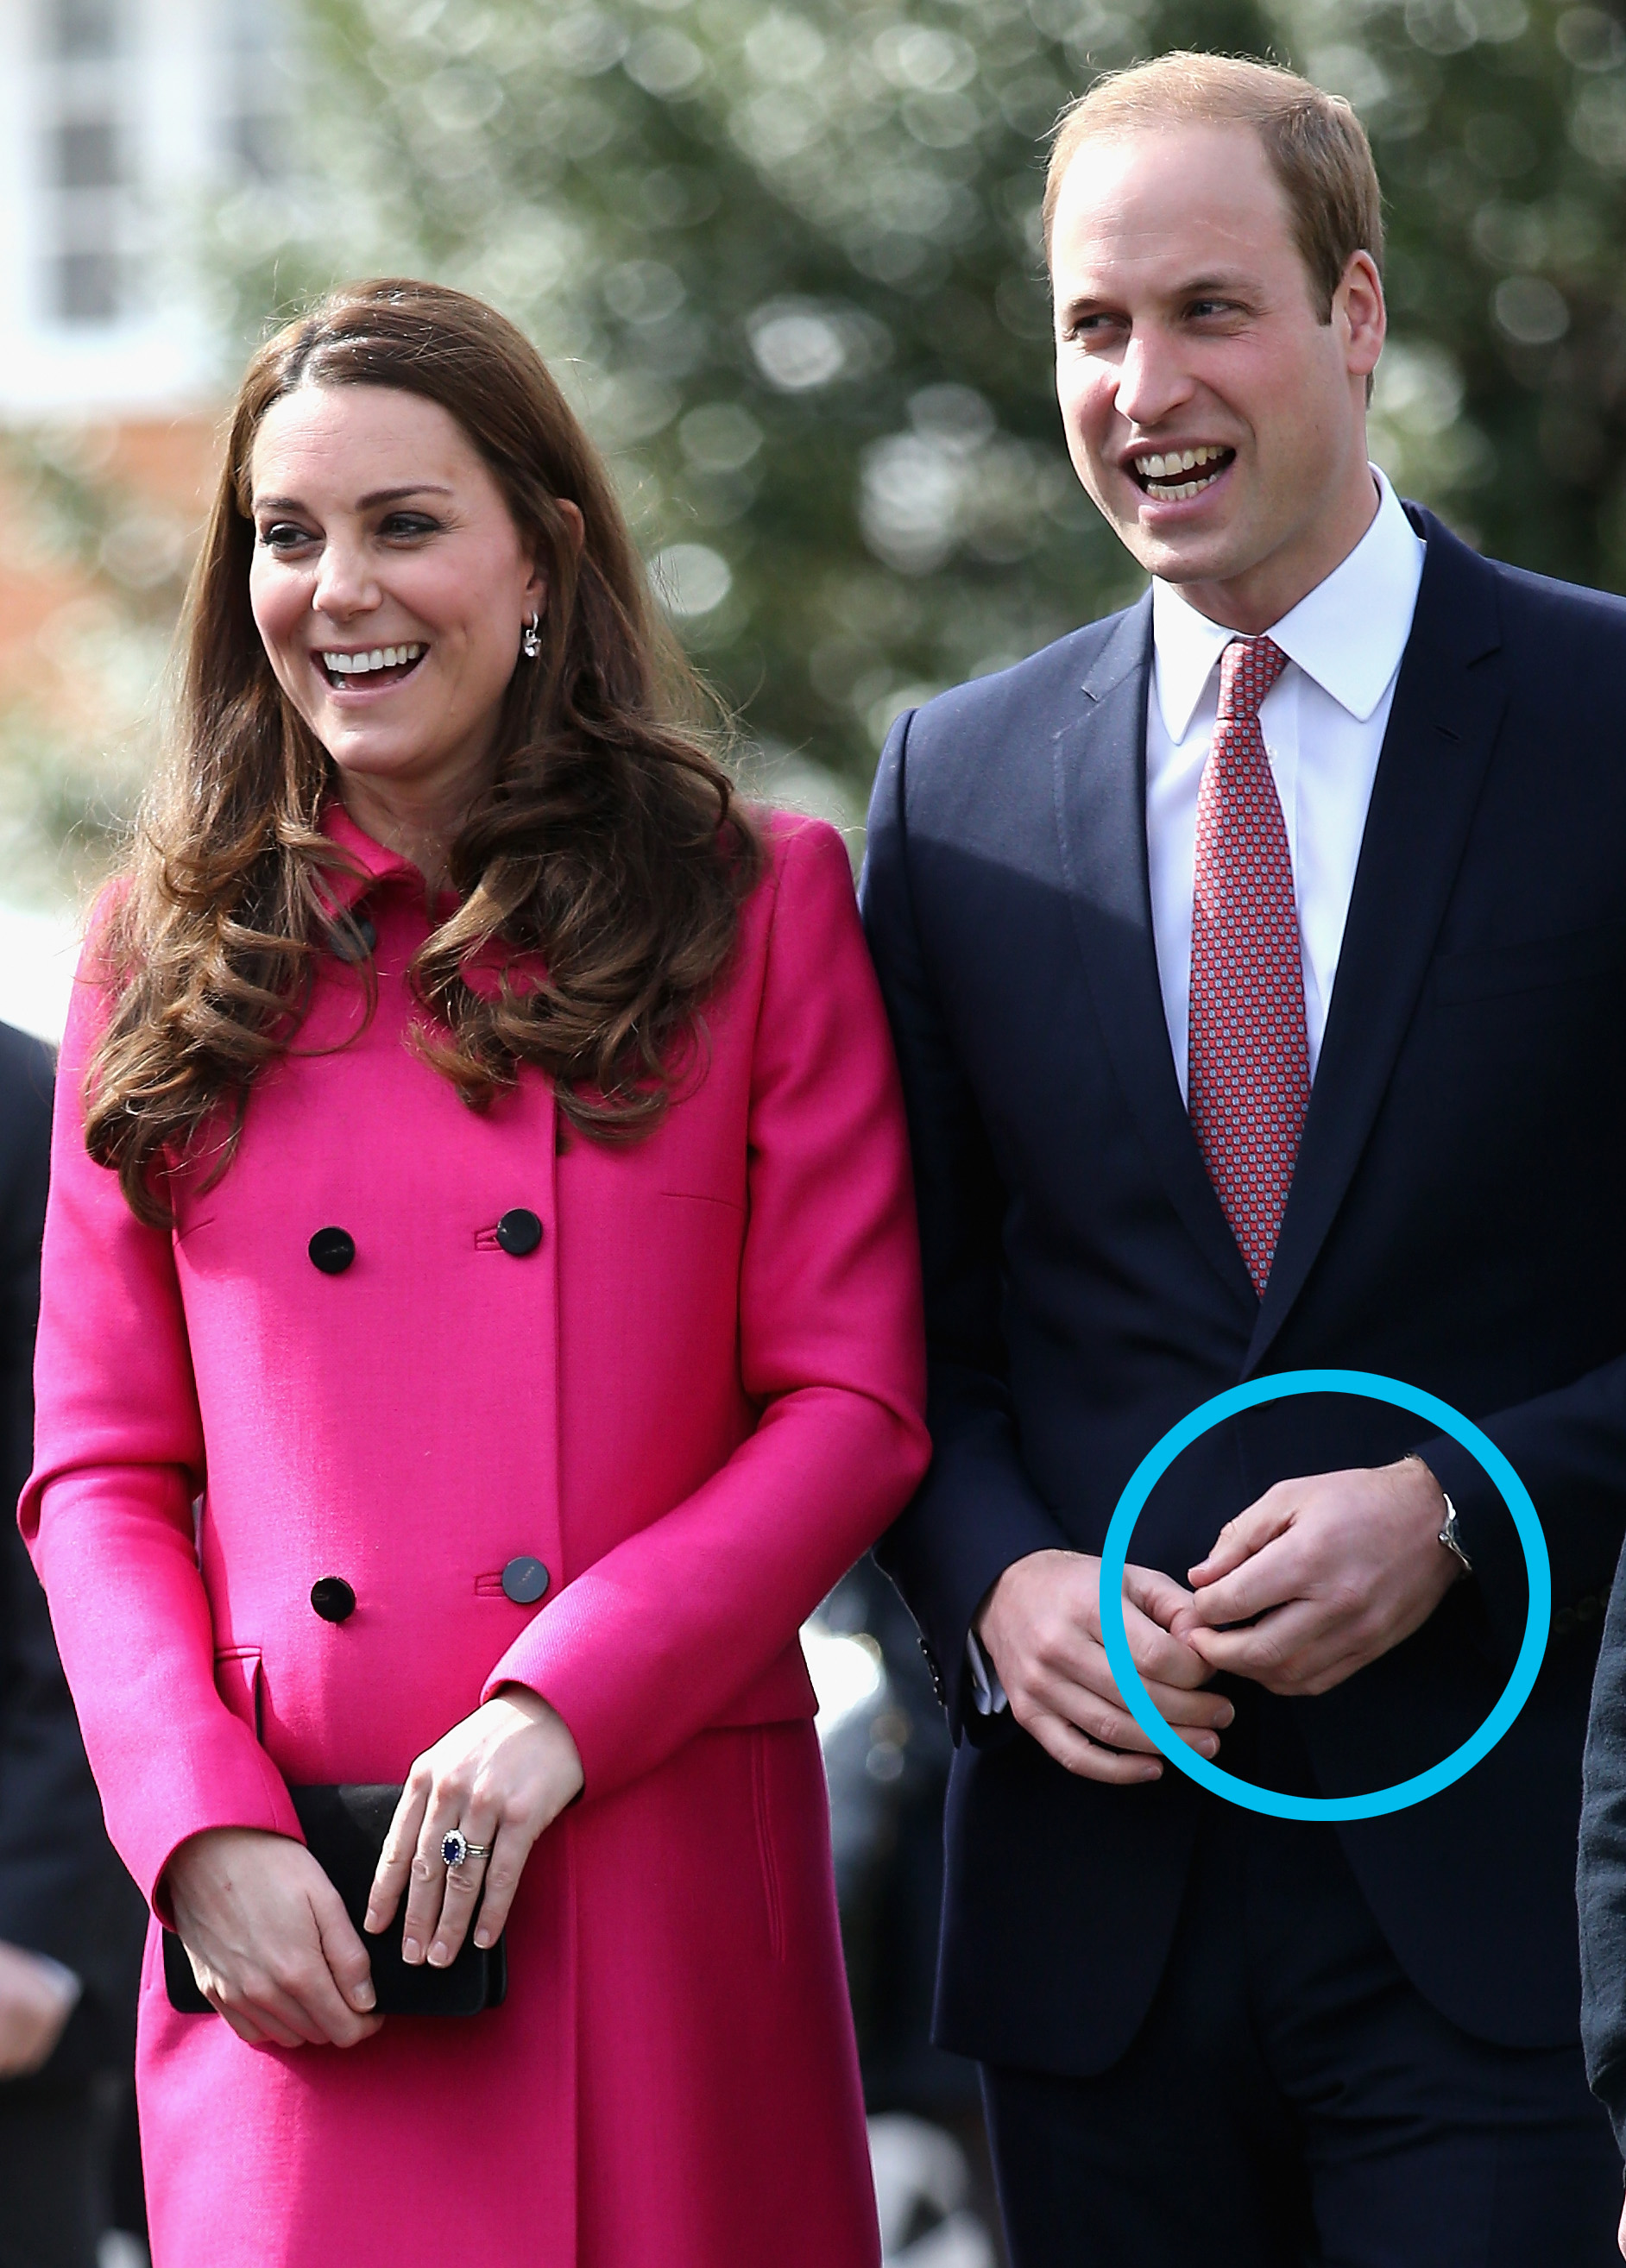 WHY PRINCE WILLIAM NEVER WEARS A WEDDING RING? – thecriticalspace